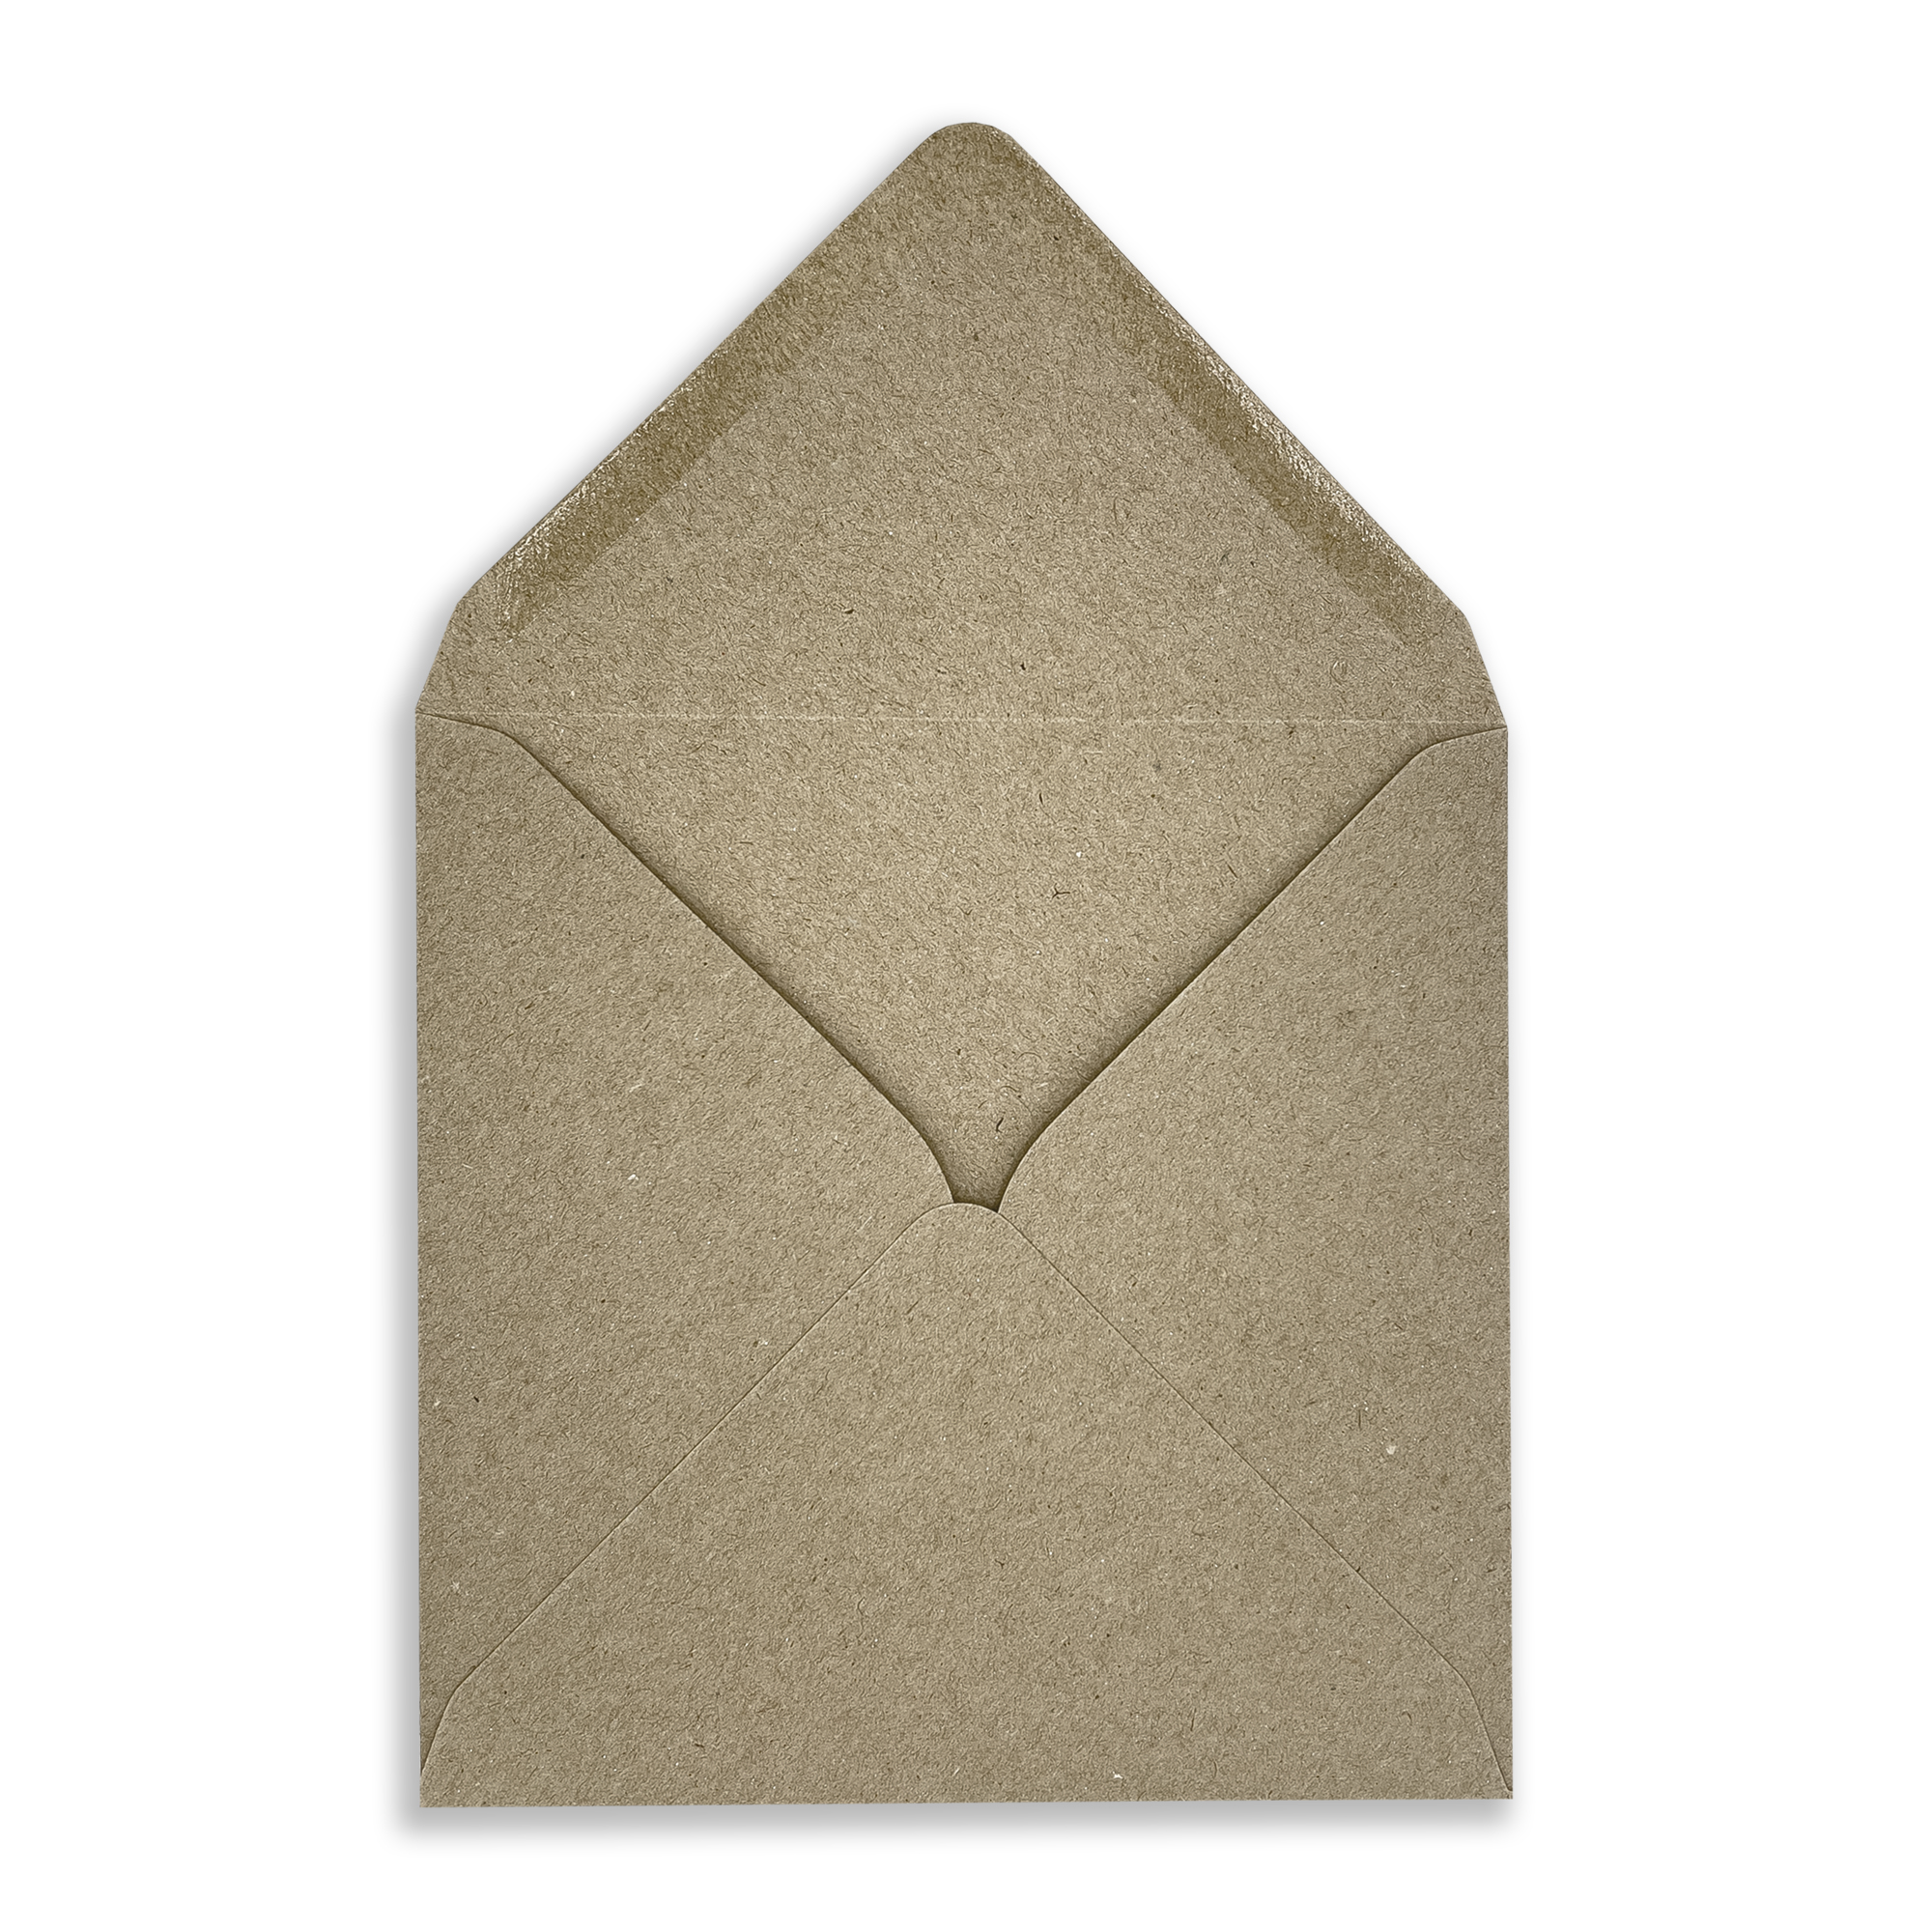 155mmSQRecycledFleckEnvelope_OpenFlap